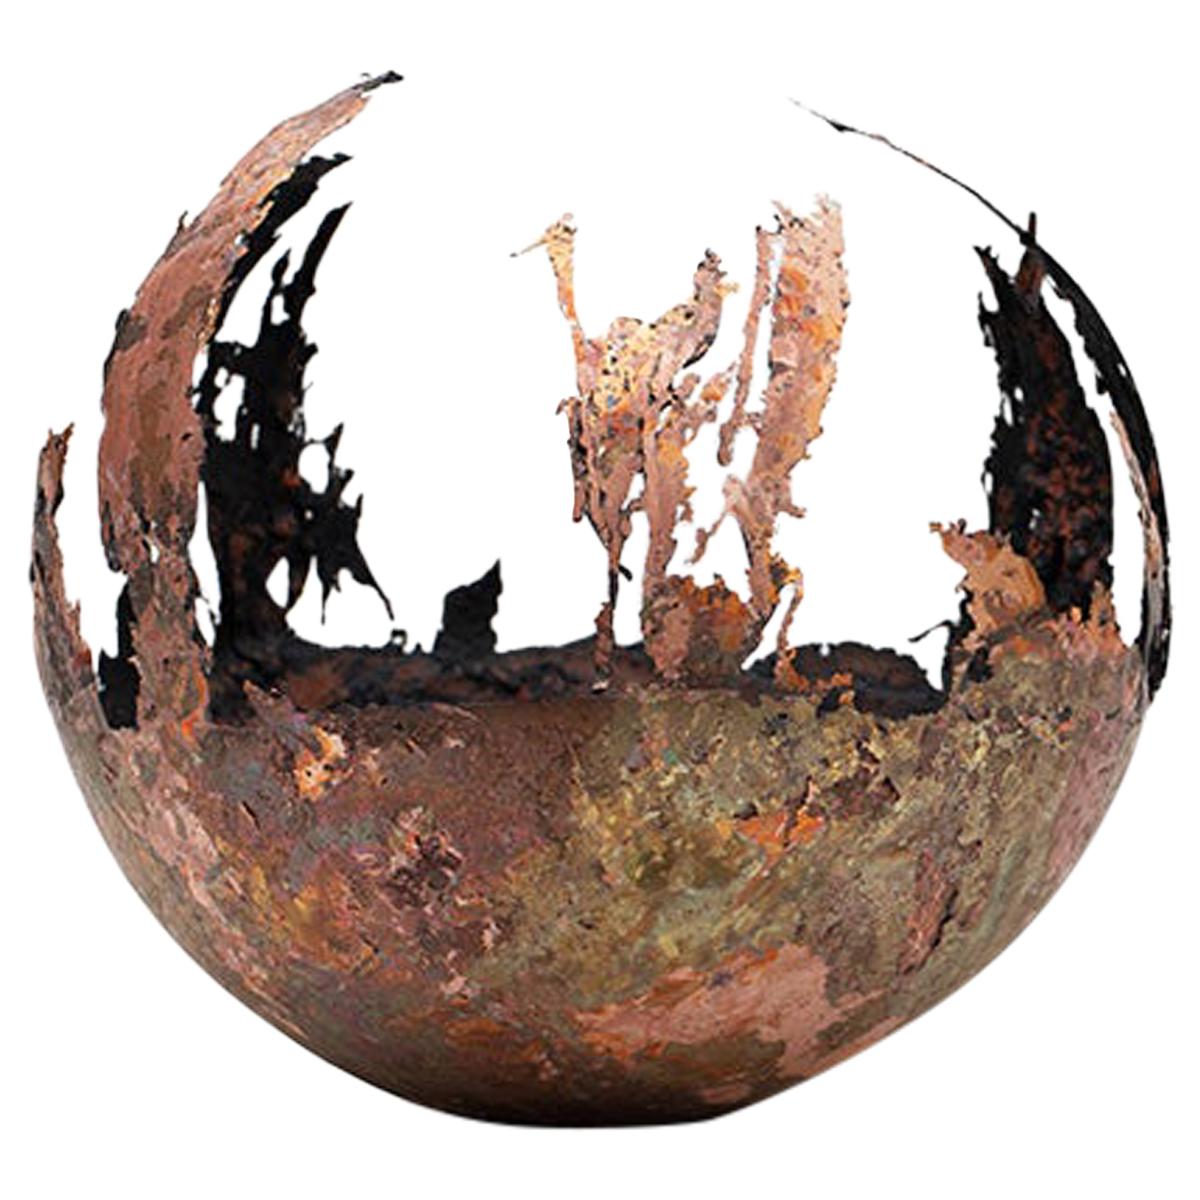 Omer Arbel 113 Series, Unique Vessel N08 in Copper Alloy Casted in Glass For Sale